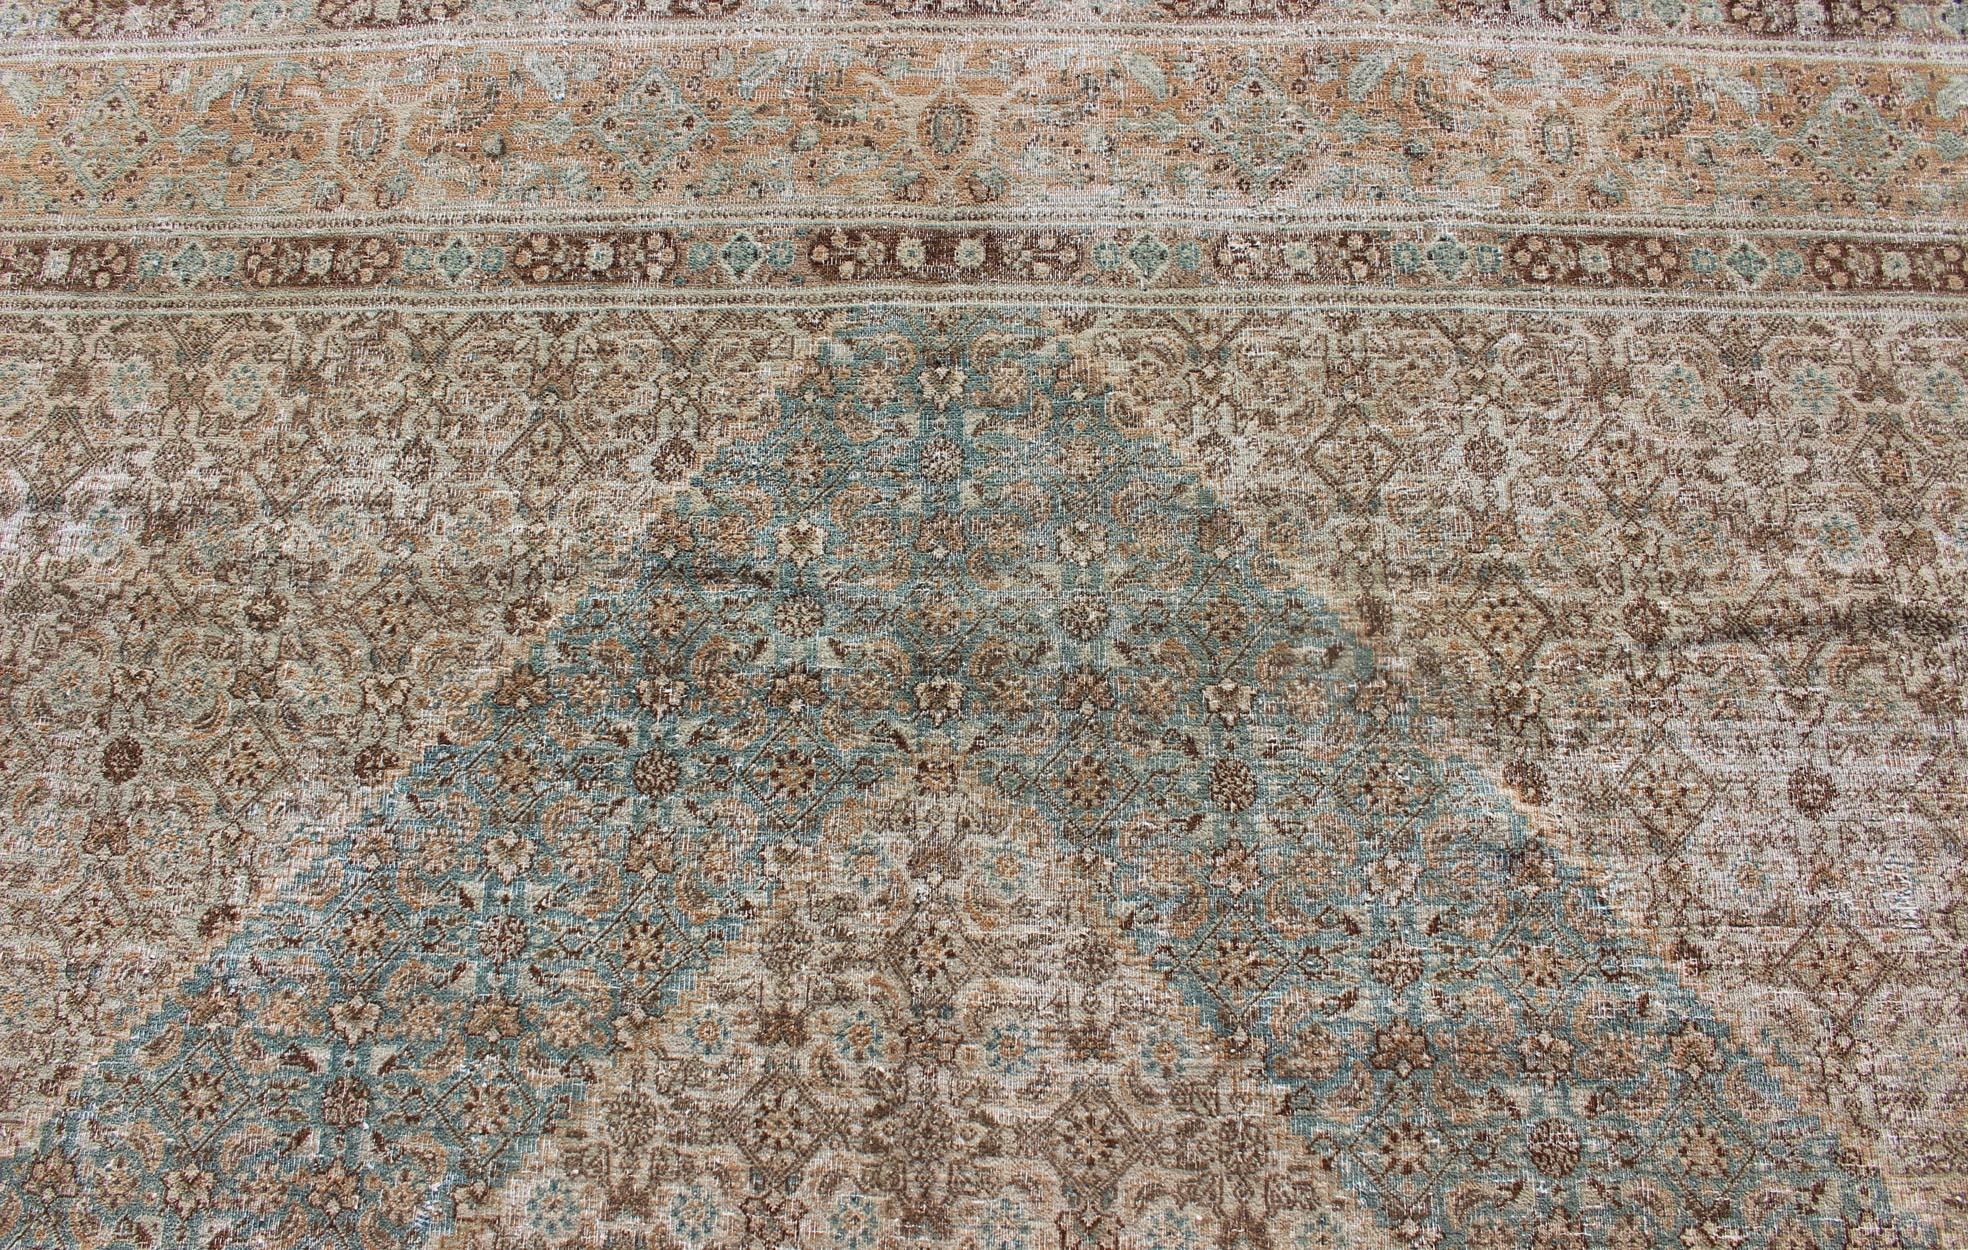 Antique Persian Khorassan Rug with a Geometric Diamond Design in Teal and Brown For Sale 6